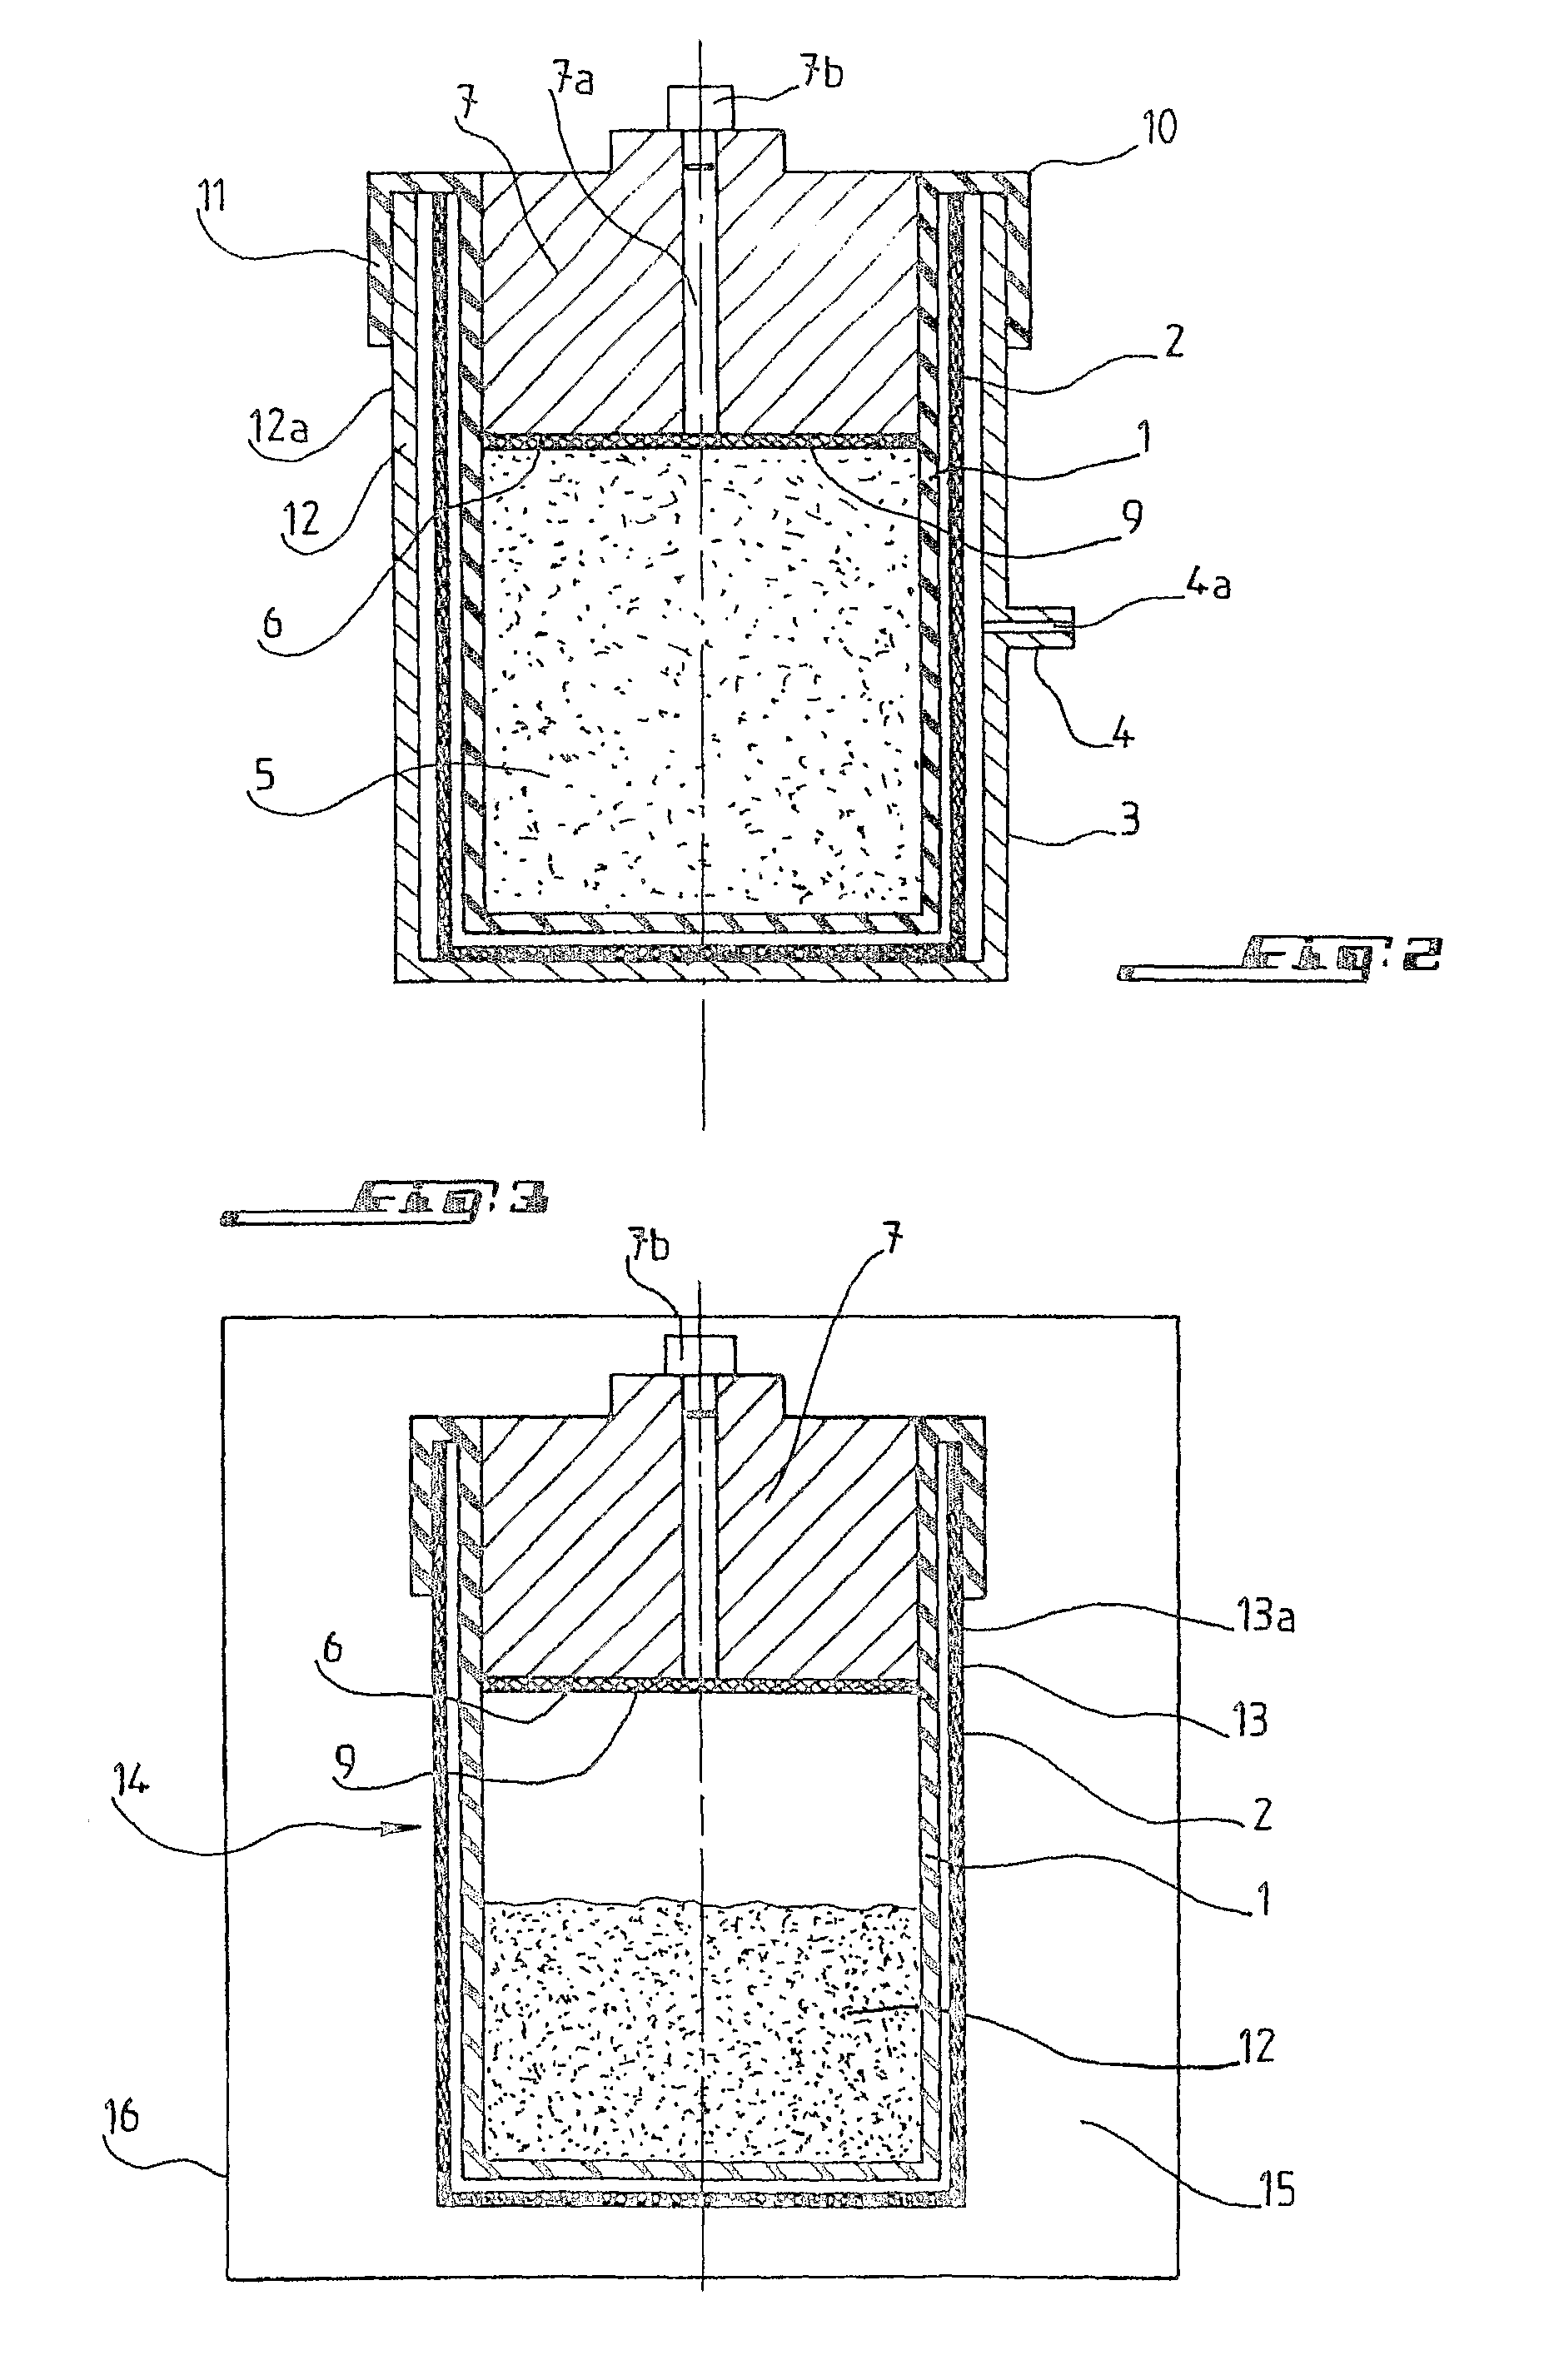 Method for preparing metal-matrix composite and device for implementing said method